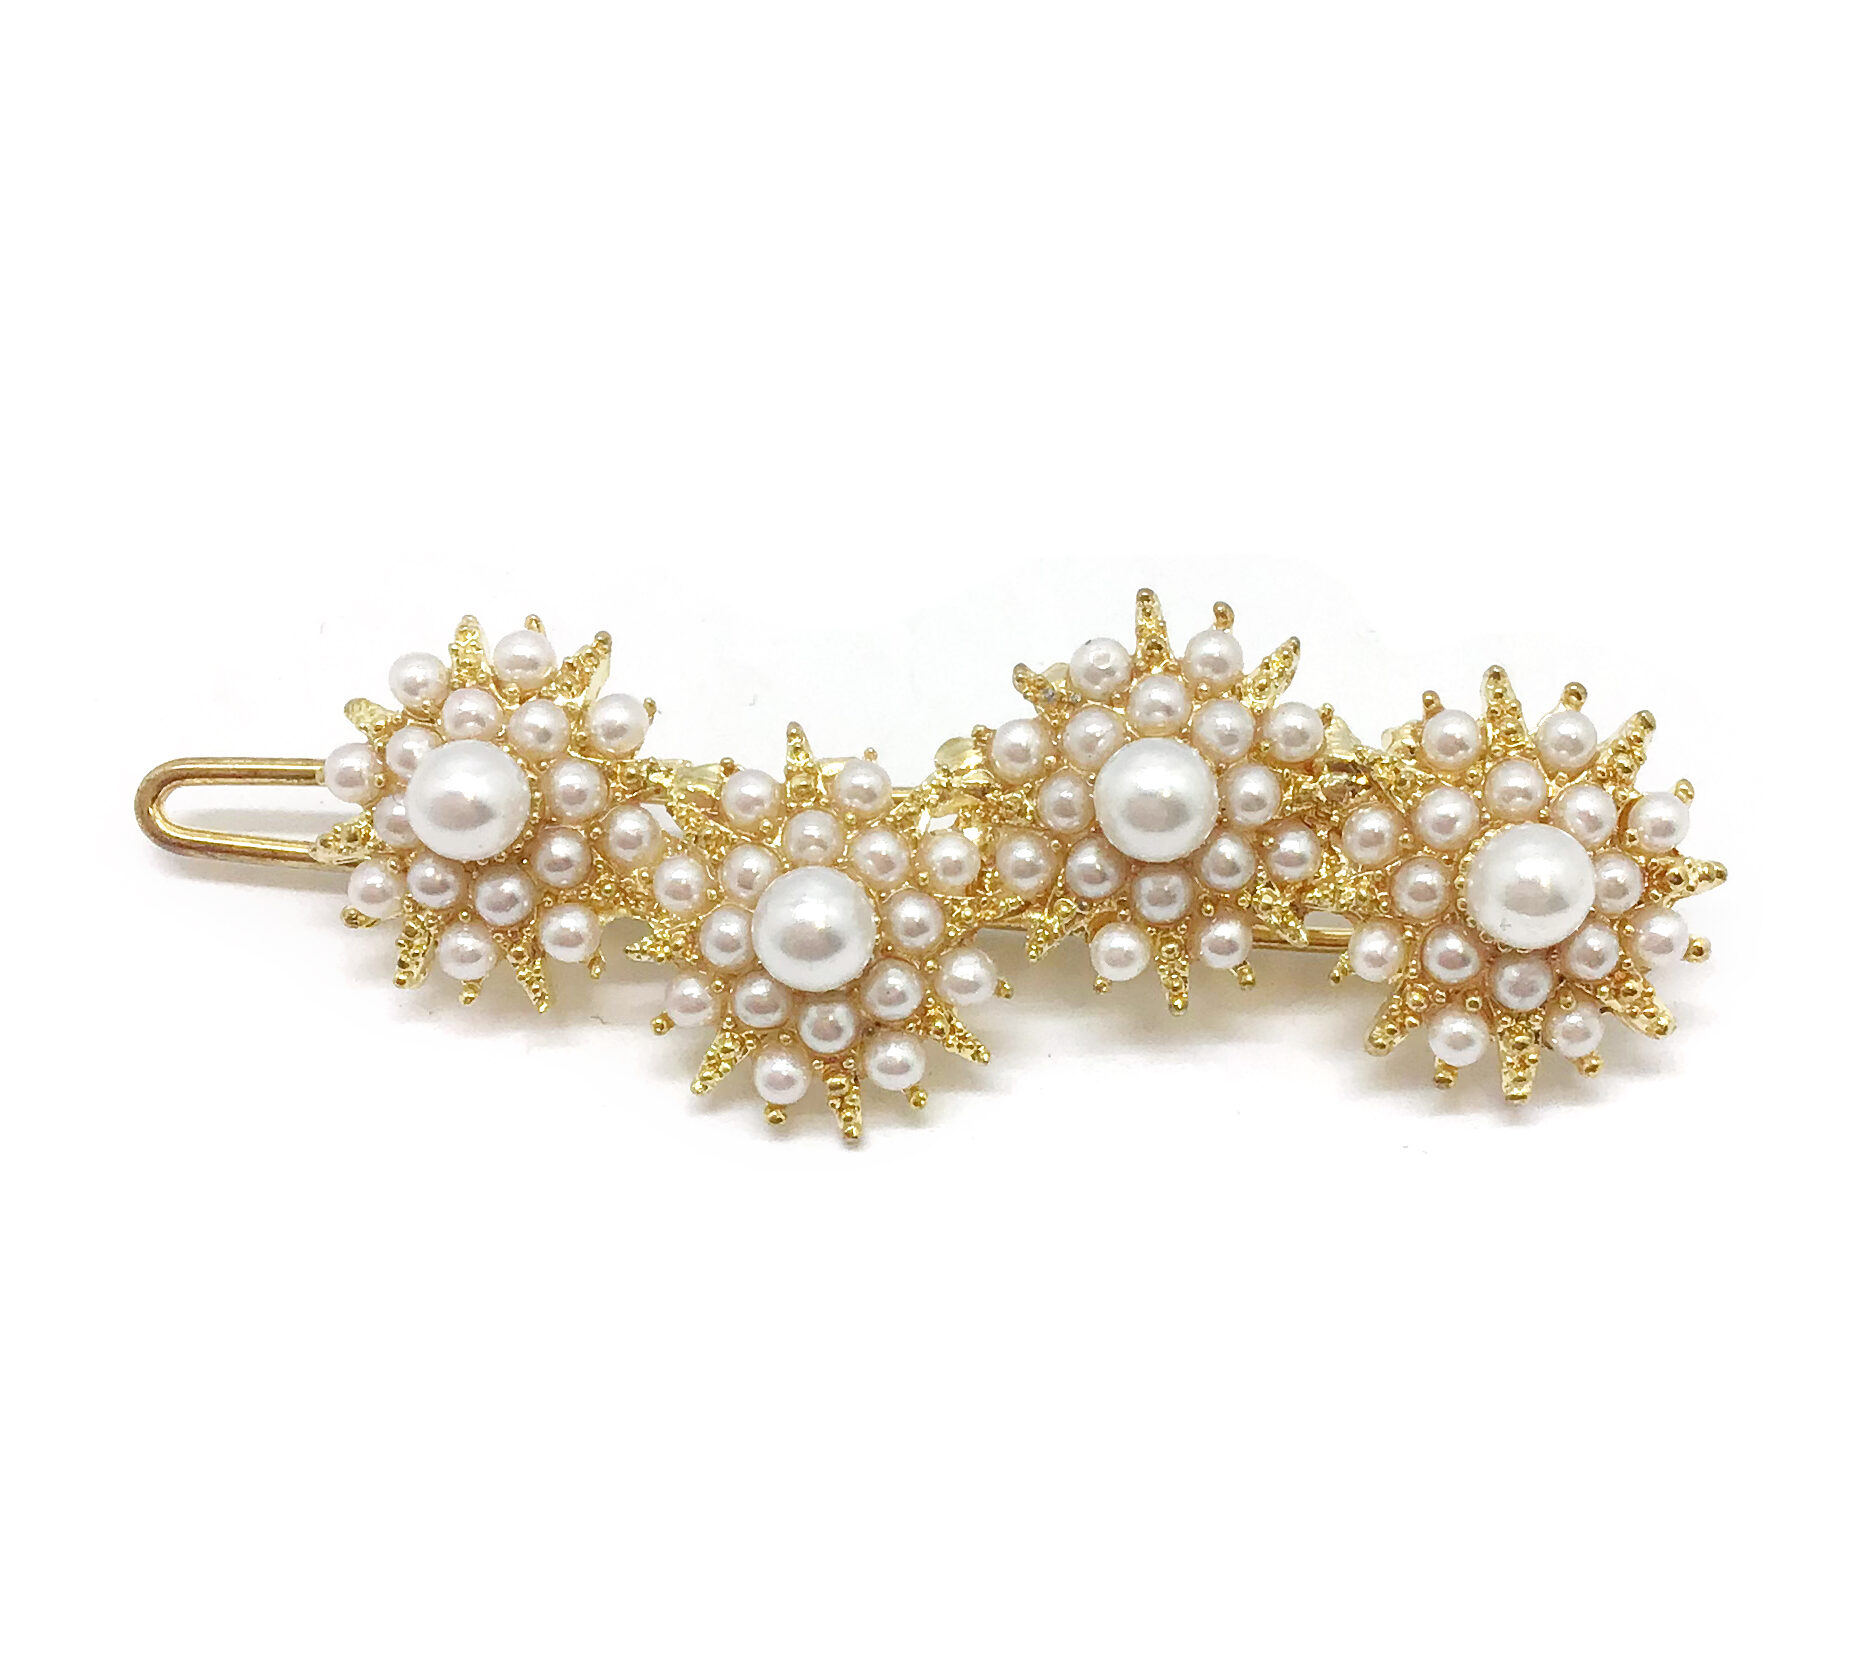 Gold Pearl Hair Clip|Roscoe|Jeanette Maree|Shop Online Now